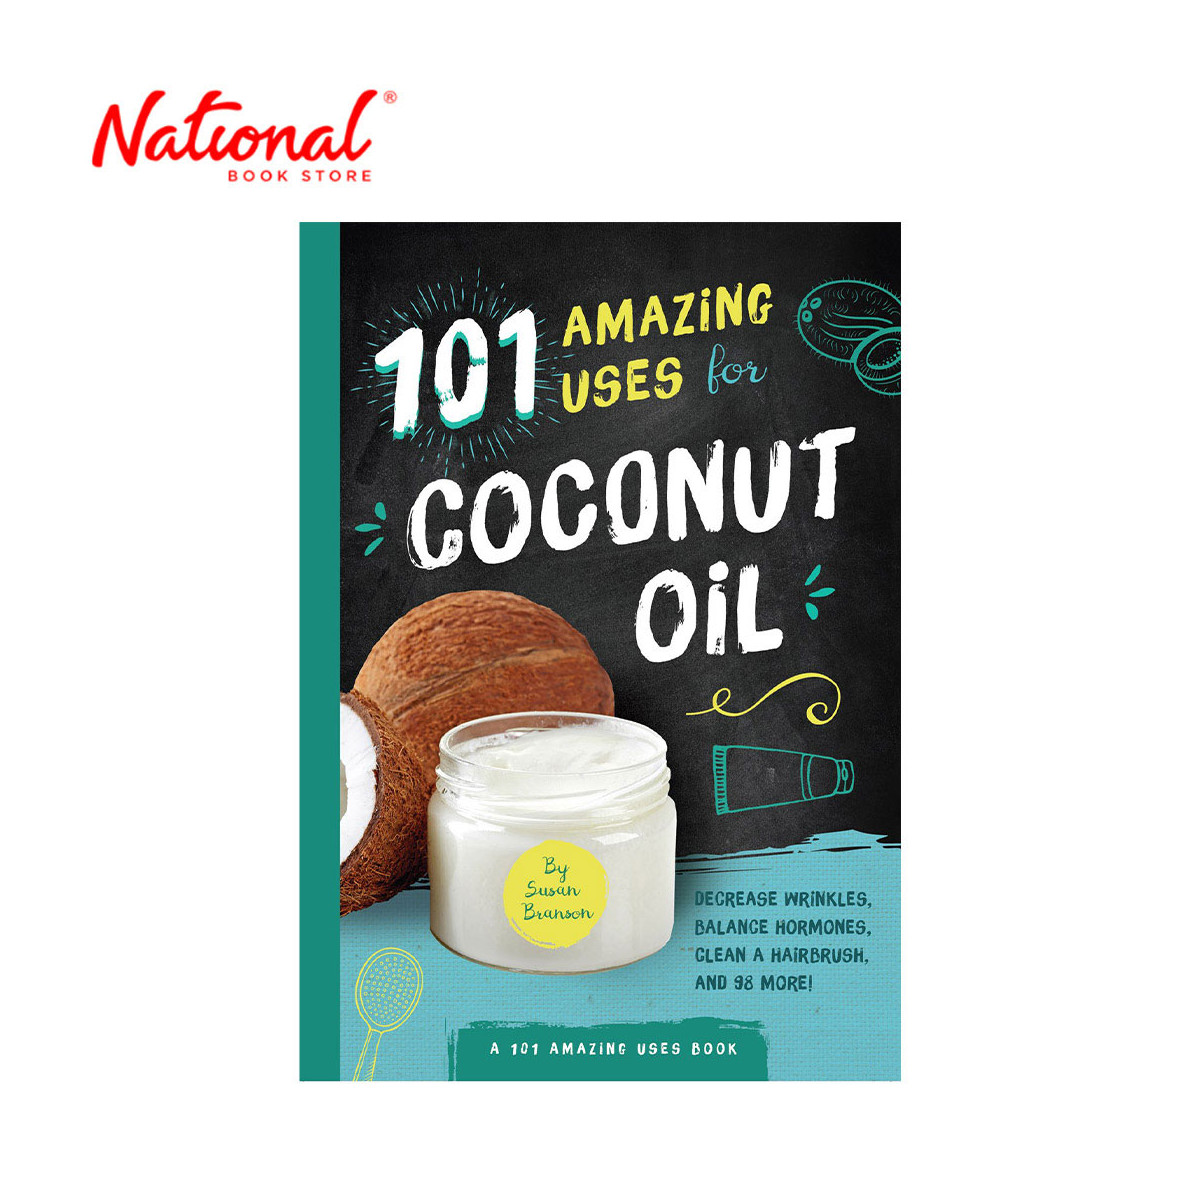 101 Amazing Uses For Coconut Oil by Susan Branson - Trade Paperback - Health & Fitness